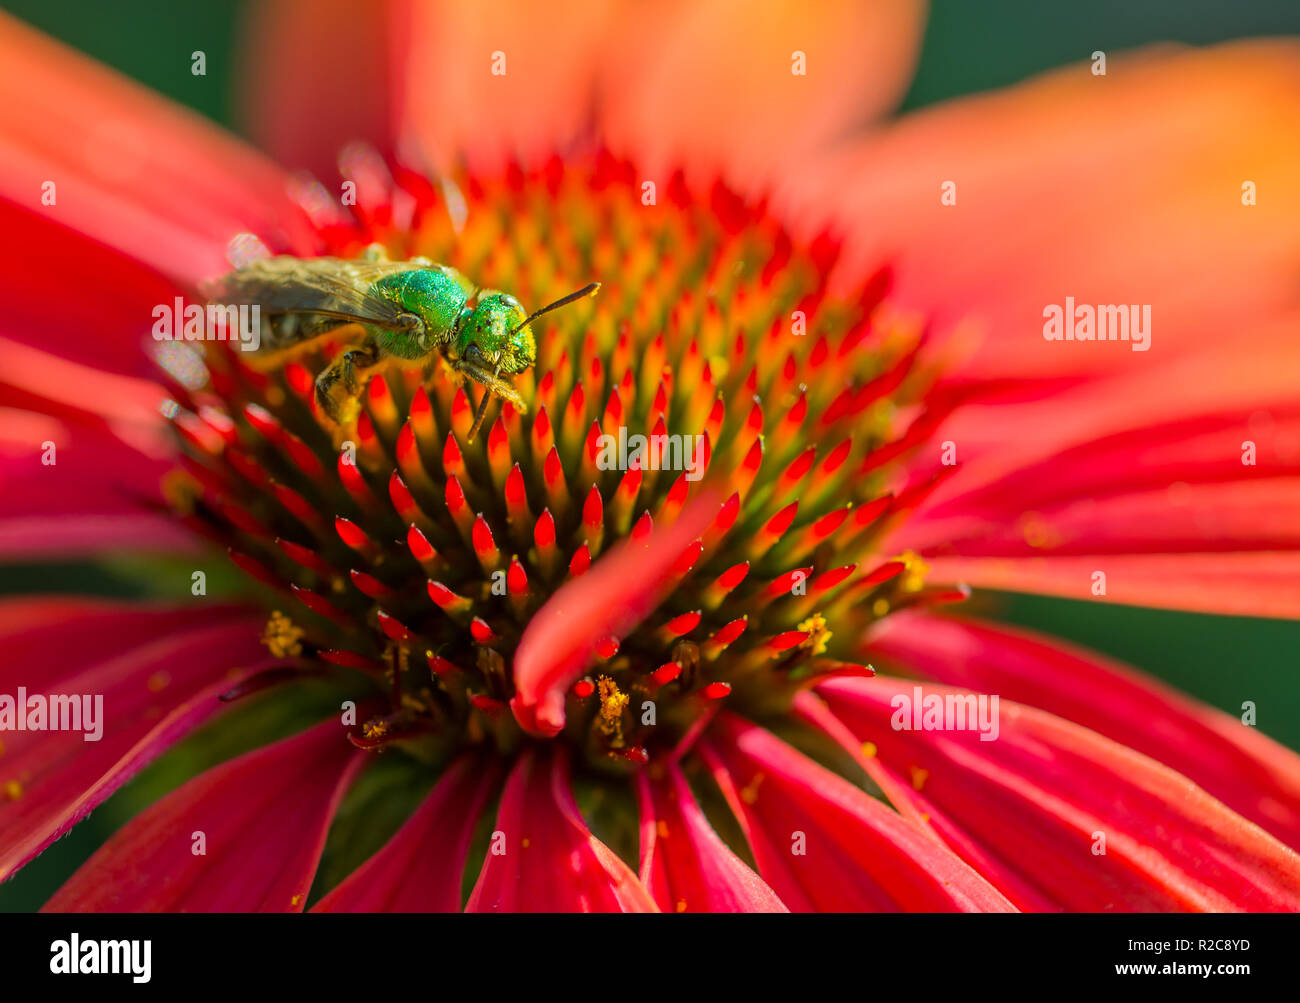 A Metallic Green Sweat Bee (Agapostemon) grooming the pollen from its antennae, on a bright red echinacea flower. Stock Photo